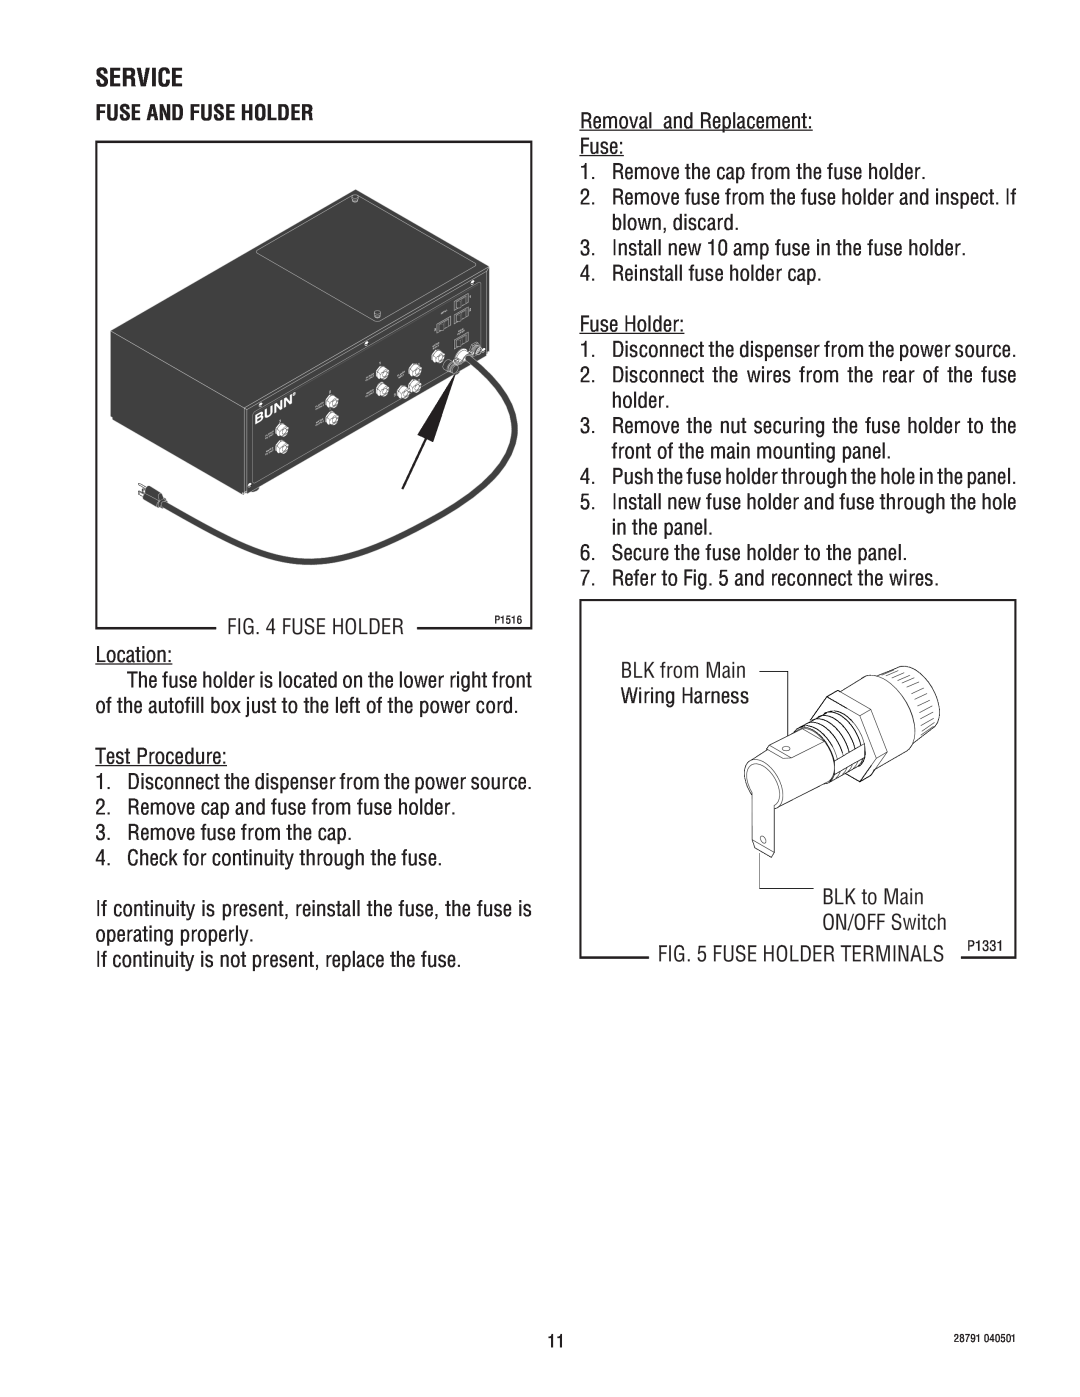 Bunn AFPO-3, AFPO-2 SL service manual Fuse And Fuse Holder, Service, Fuse Holder Terminals 